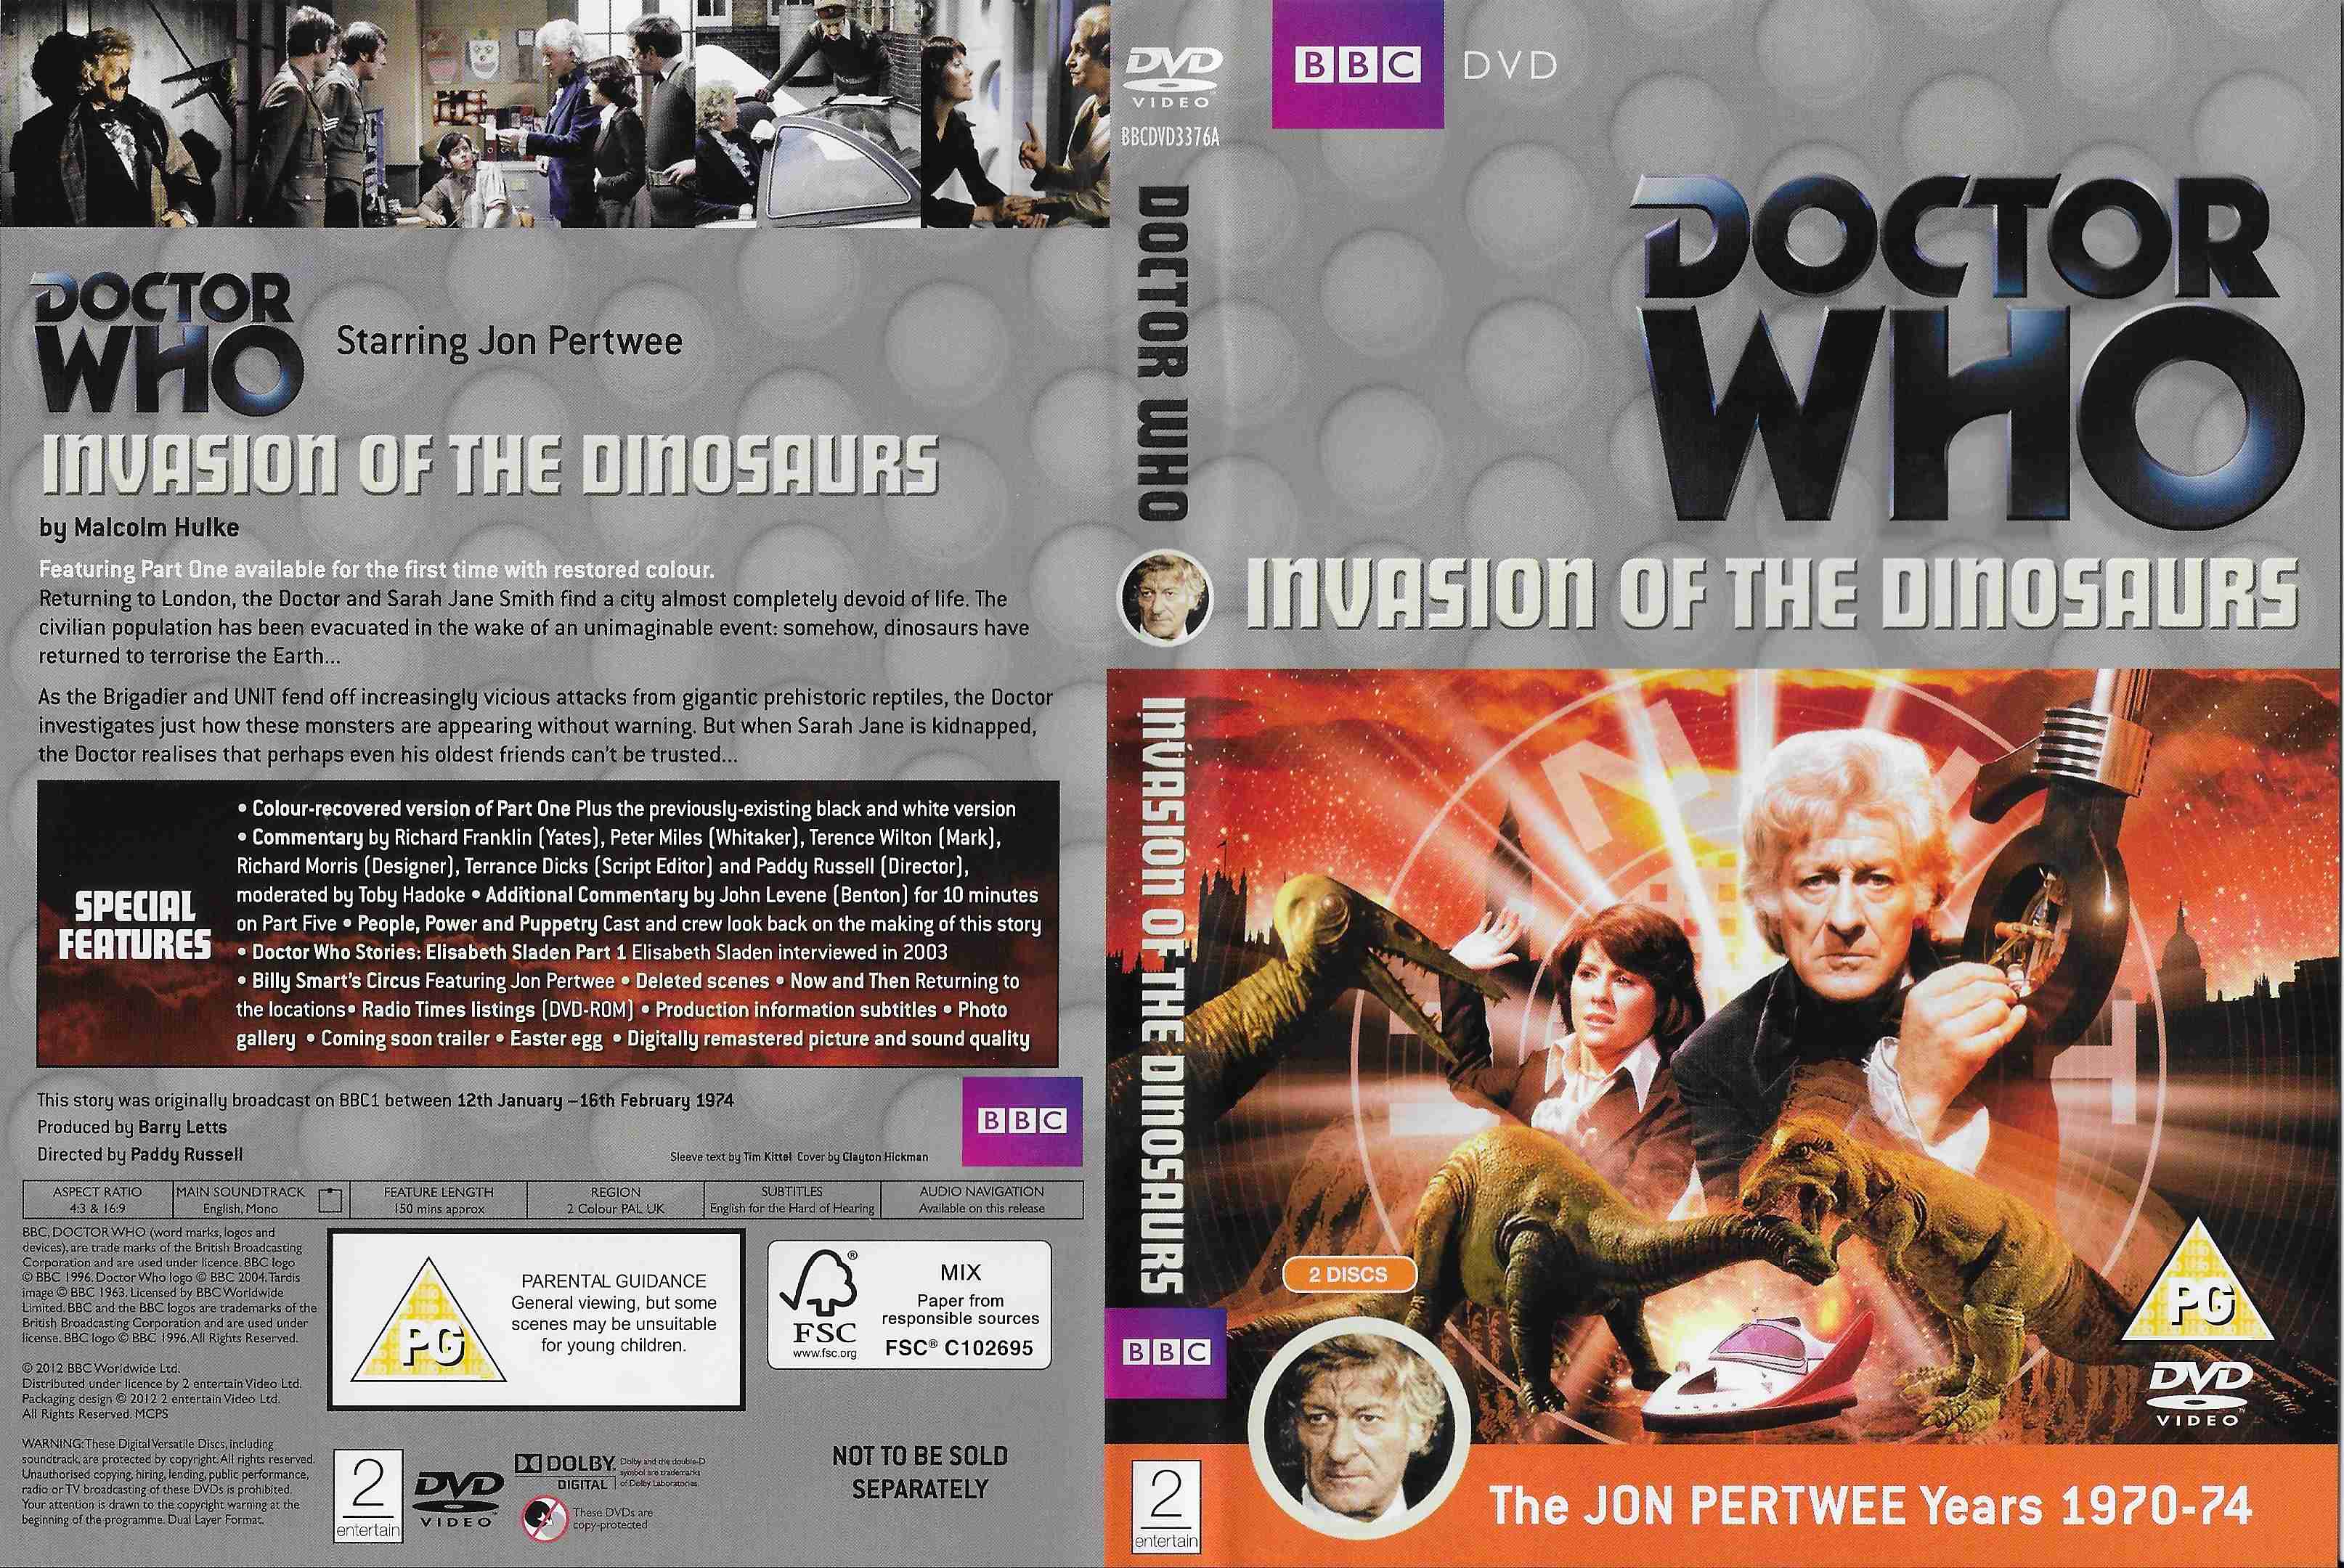 Back cover of BBCDVD 3376A